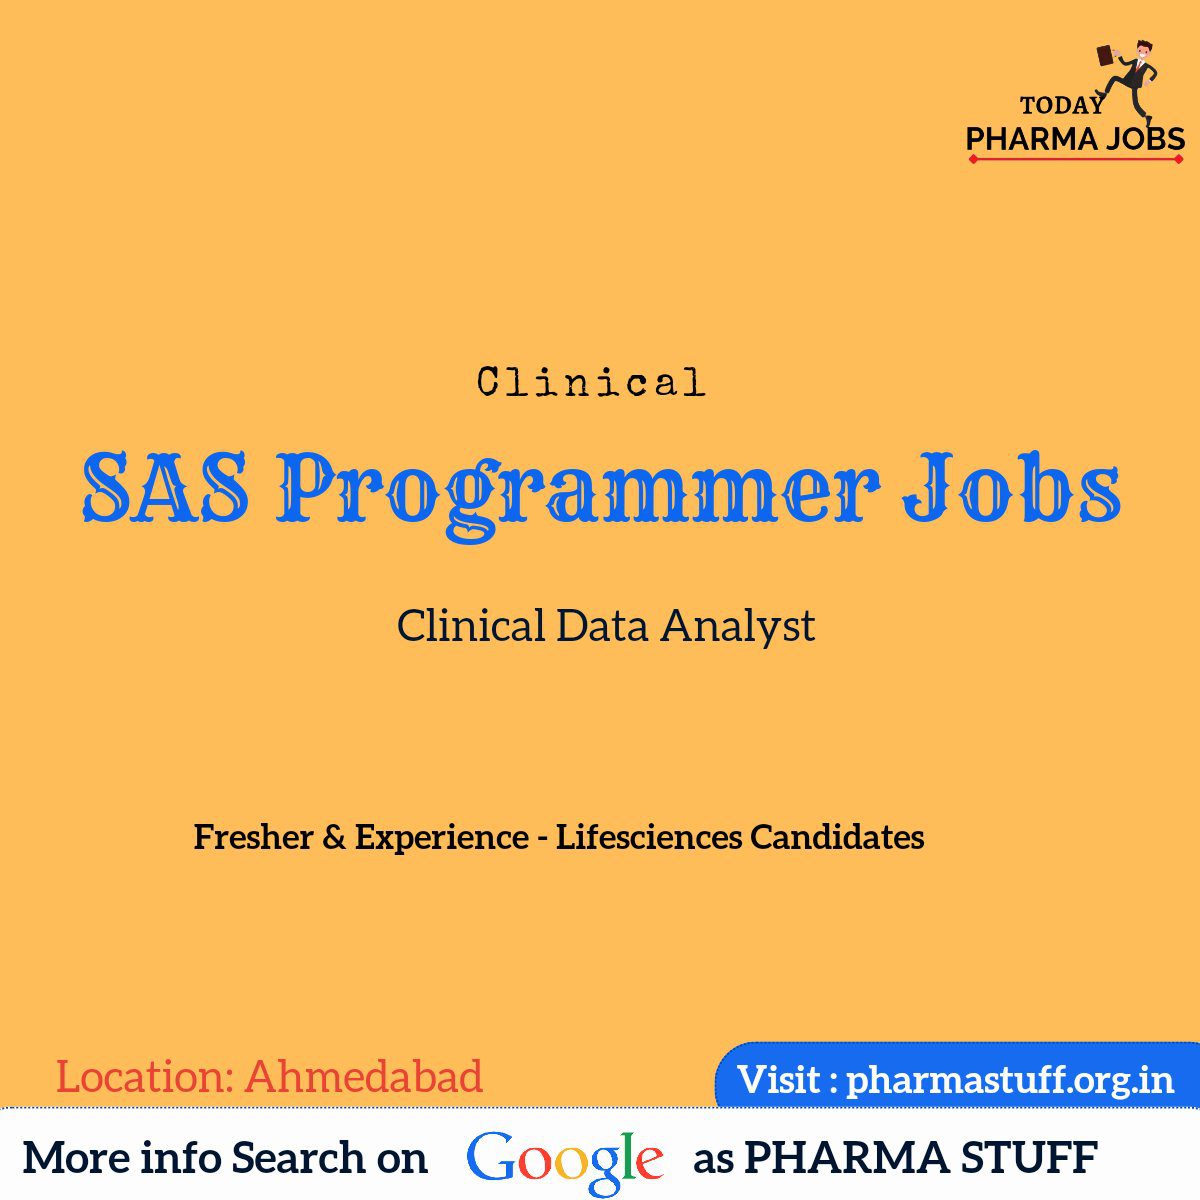 %titl clinical sas programmer jobs for freshers 7296167568424725581.